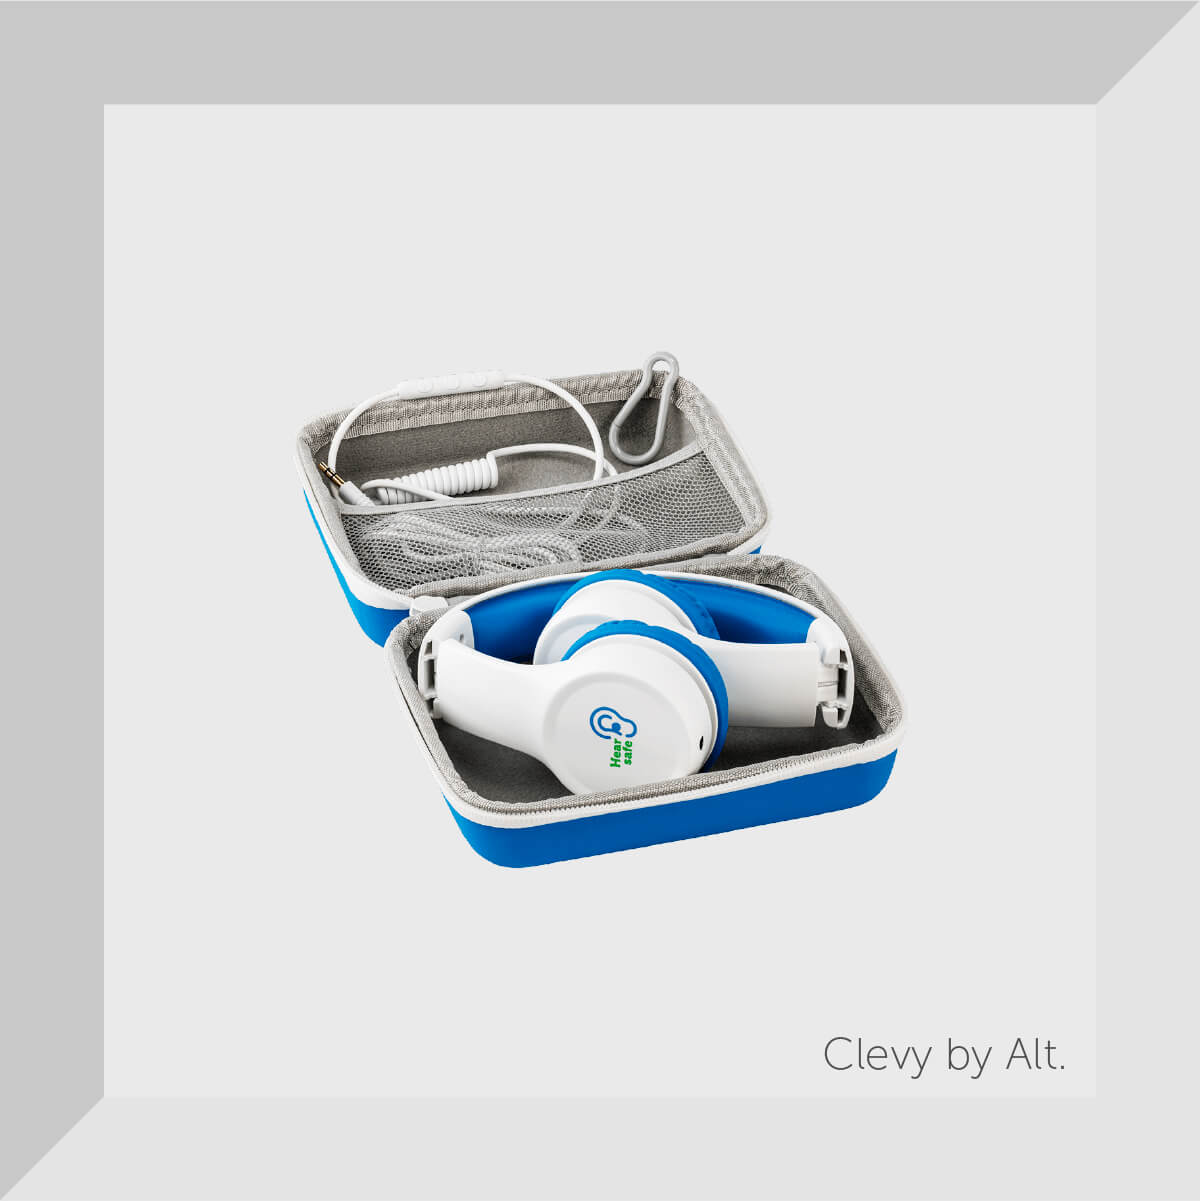 Clevy Headphones - Cuffie Clevy hearsafe